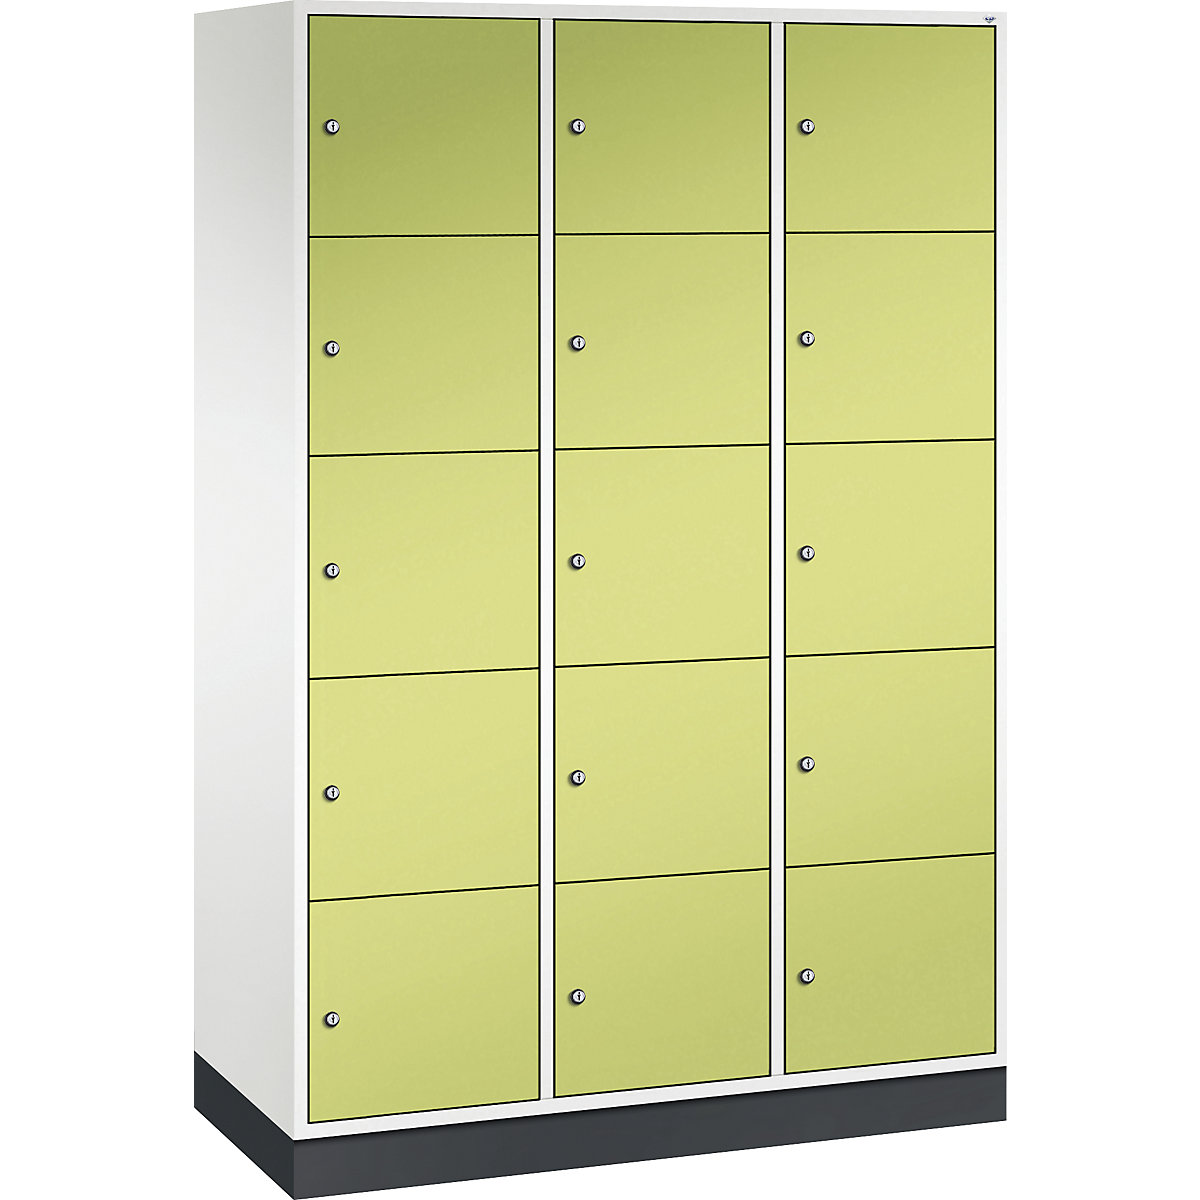 INTRO steel compartment locker, compartment height 345 mm – C+P, WxD 1220 x 500 mm, 15 compartments, pure white body, viridian green doors